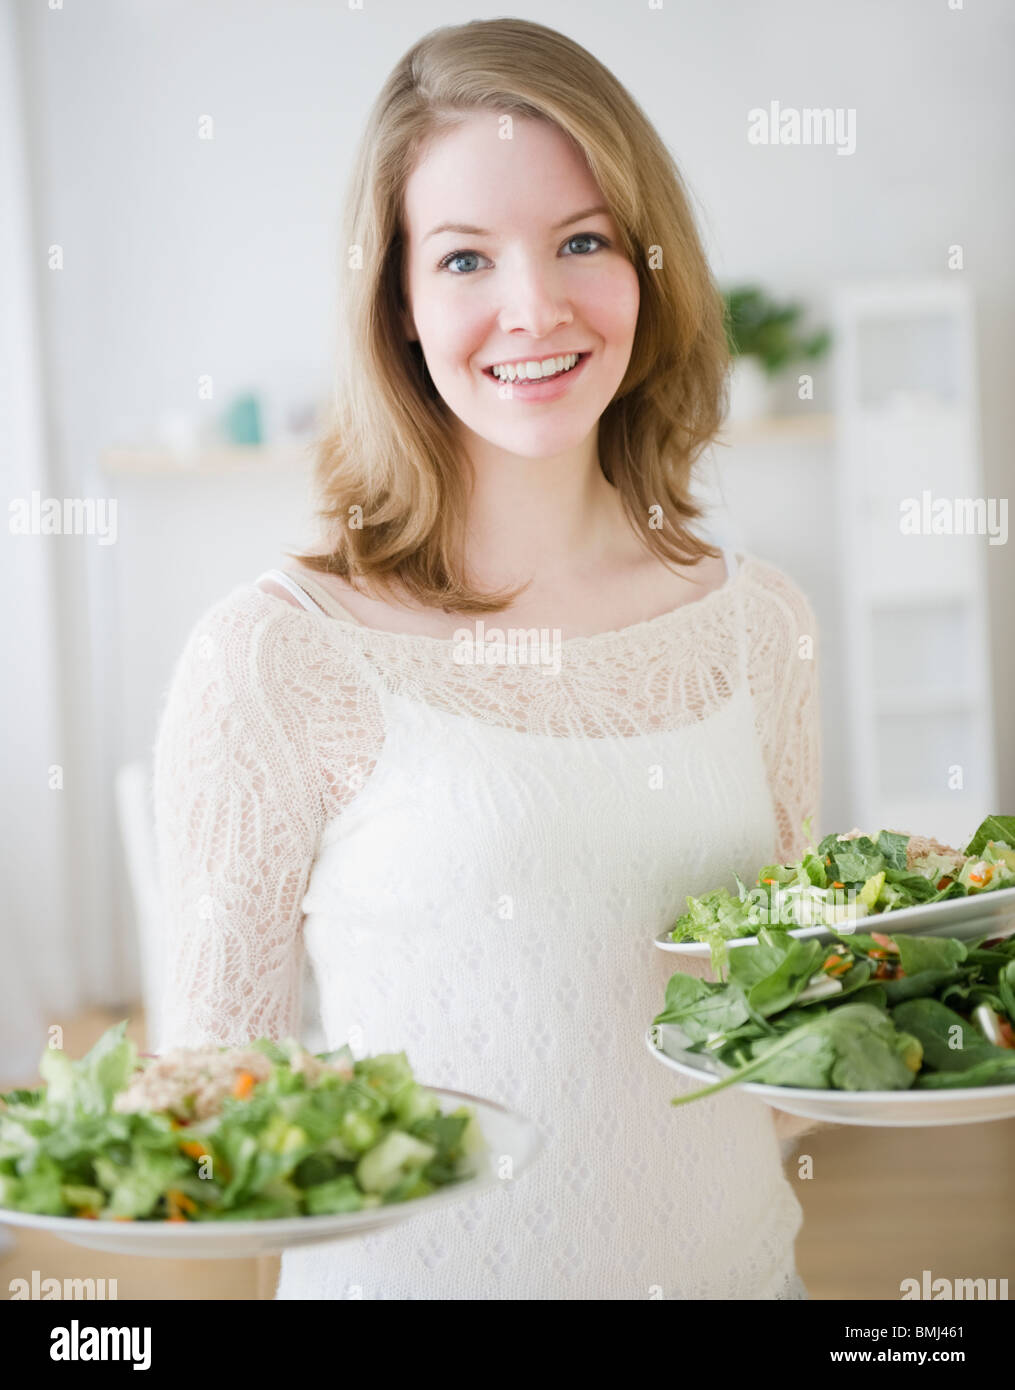 Woman carrying plates of salad Stock Photo